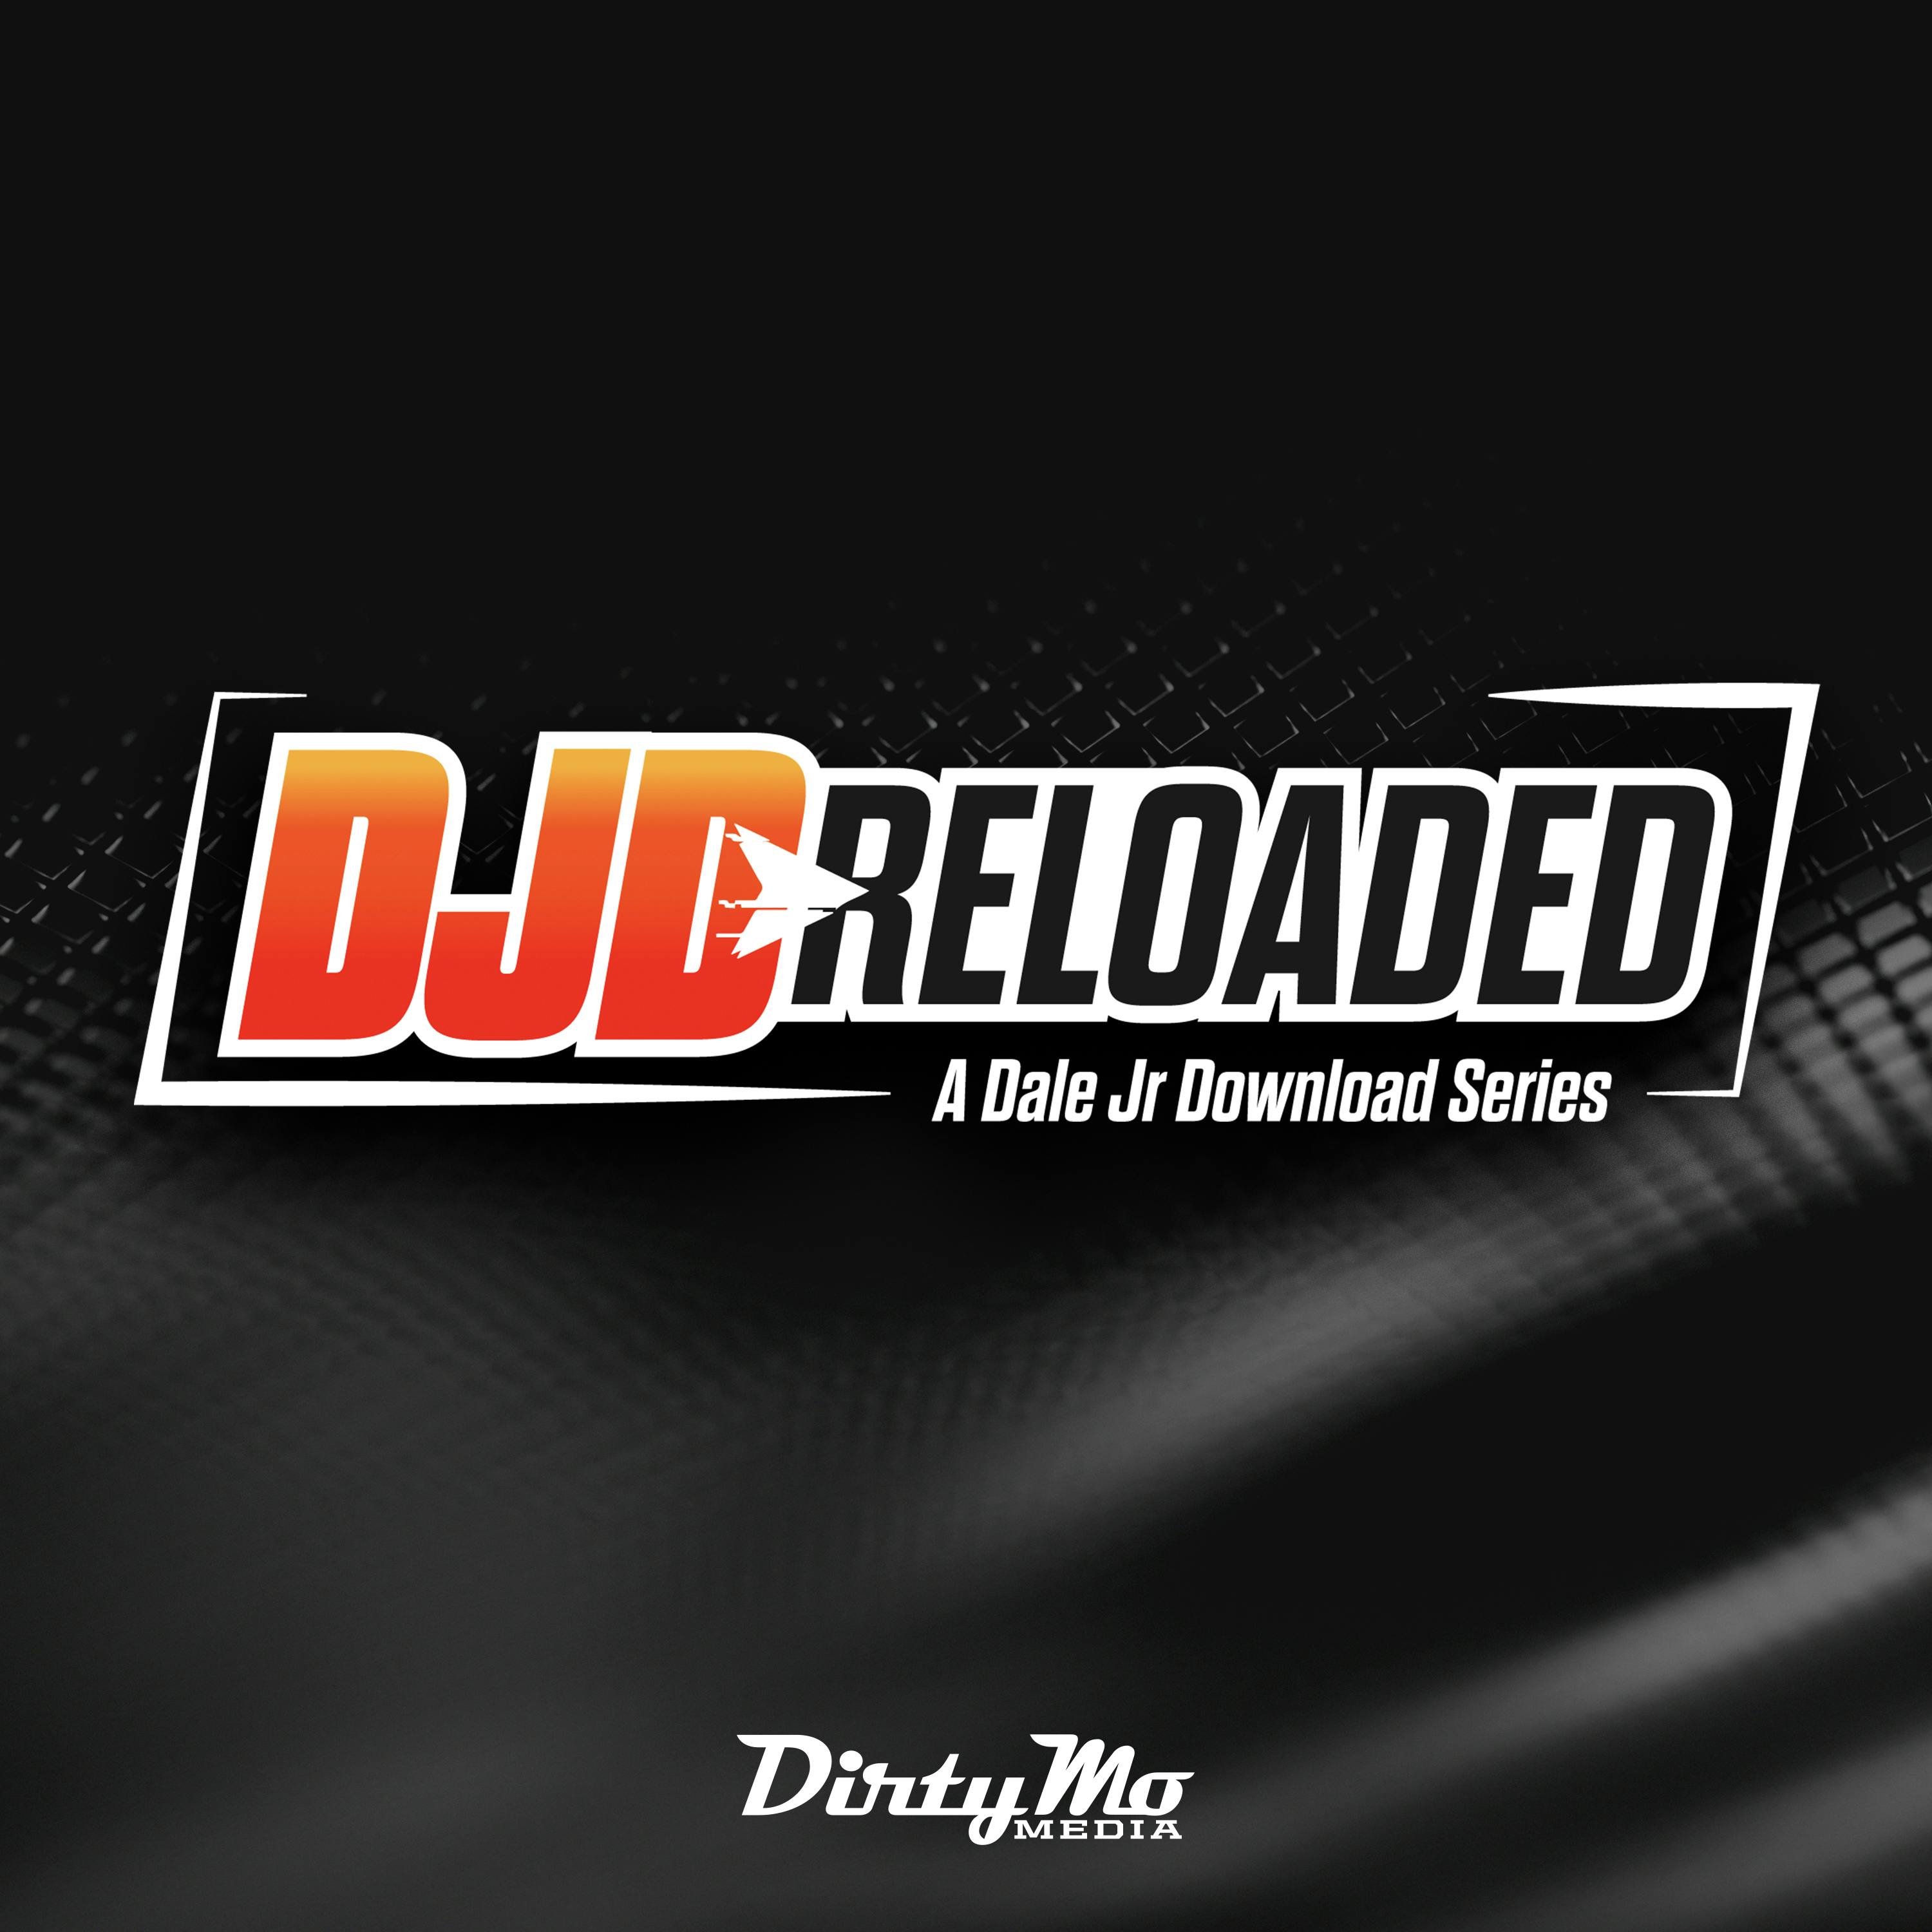 DJD Reloaded - Alex Bowman Joins, Dale Jr. Breaks News, and Ray Evernham's Untold Stories